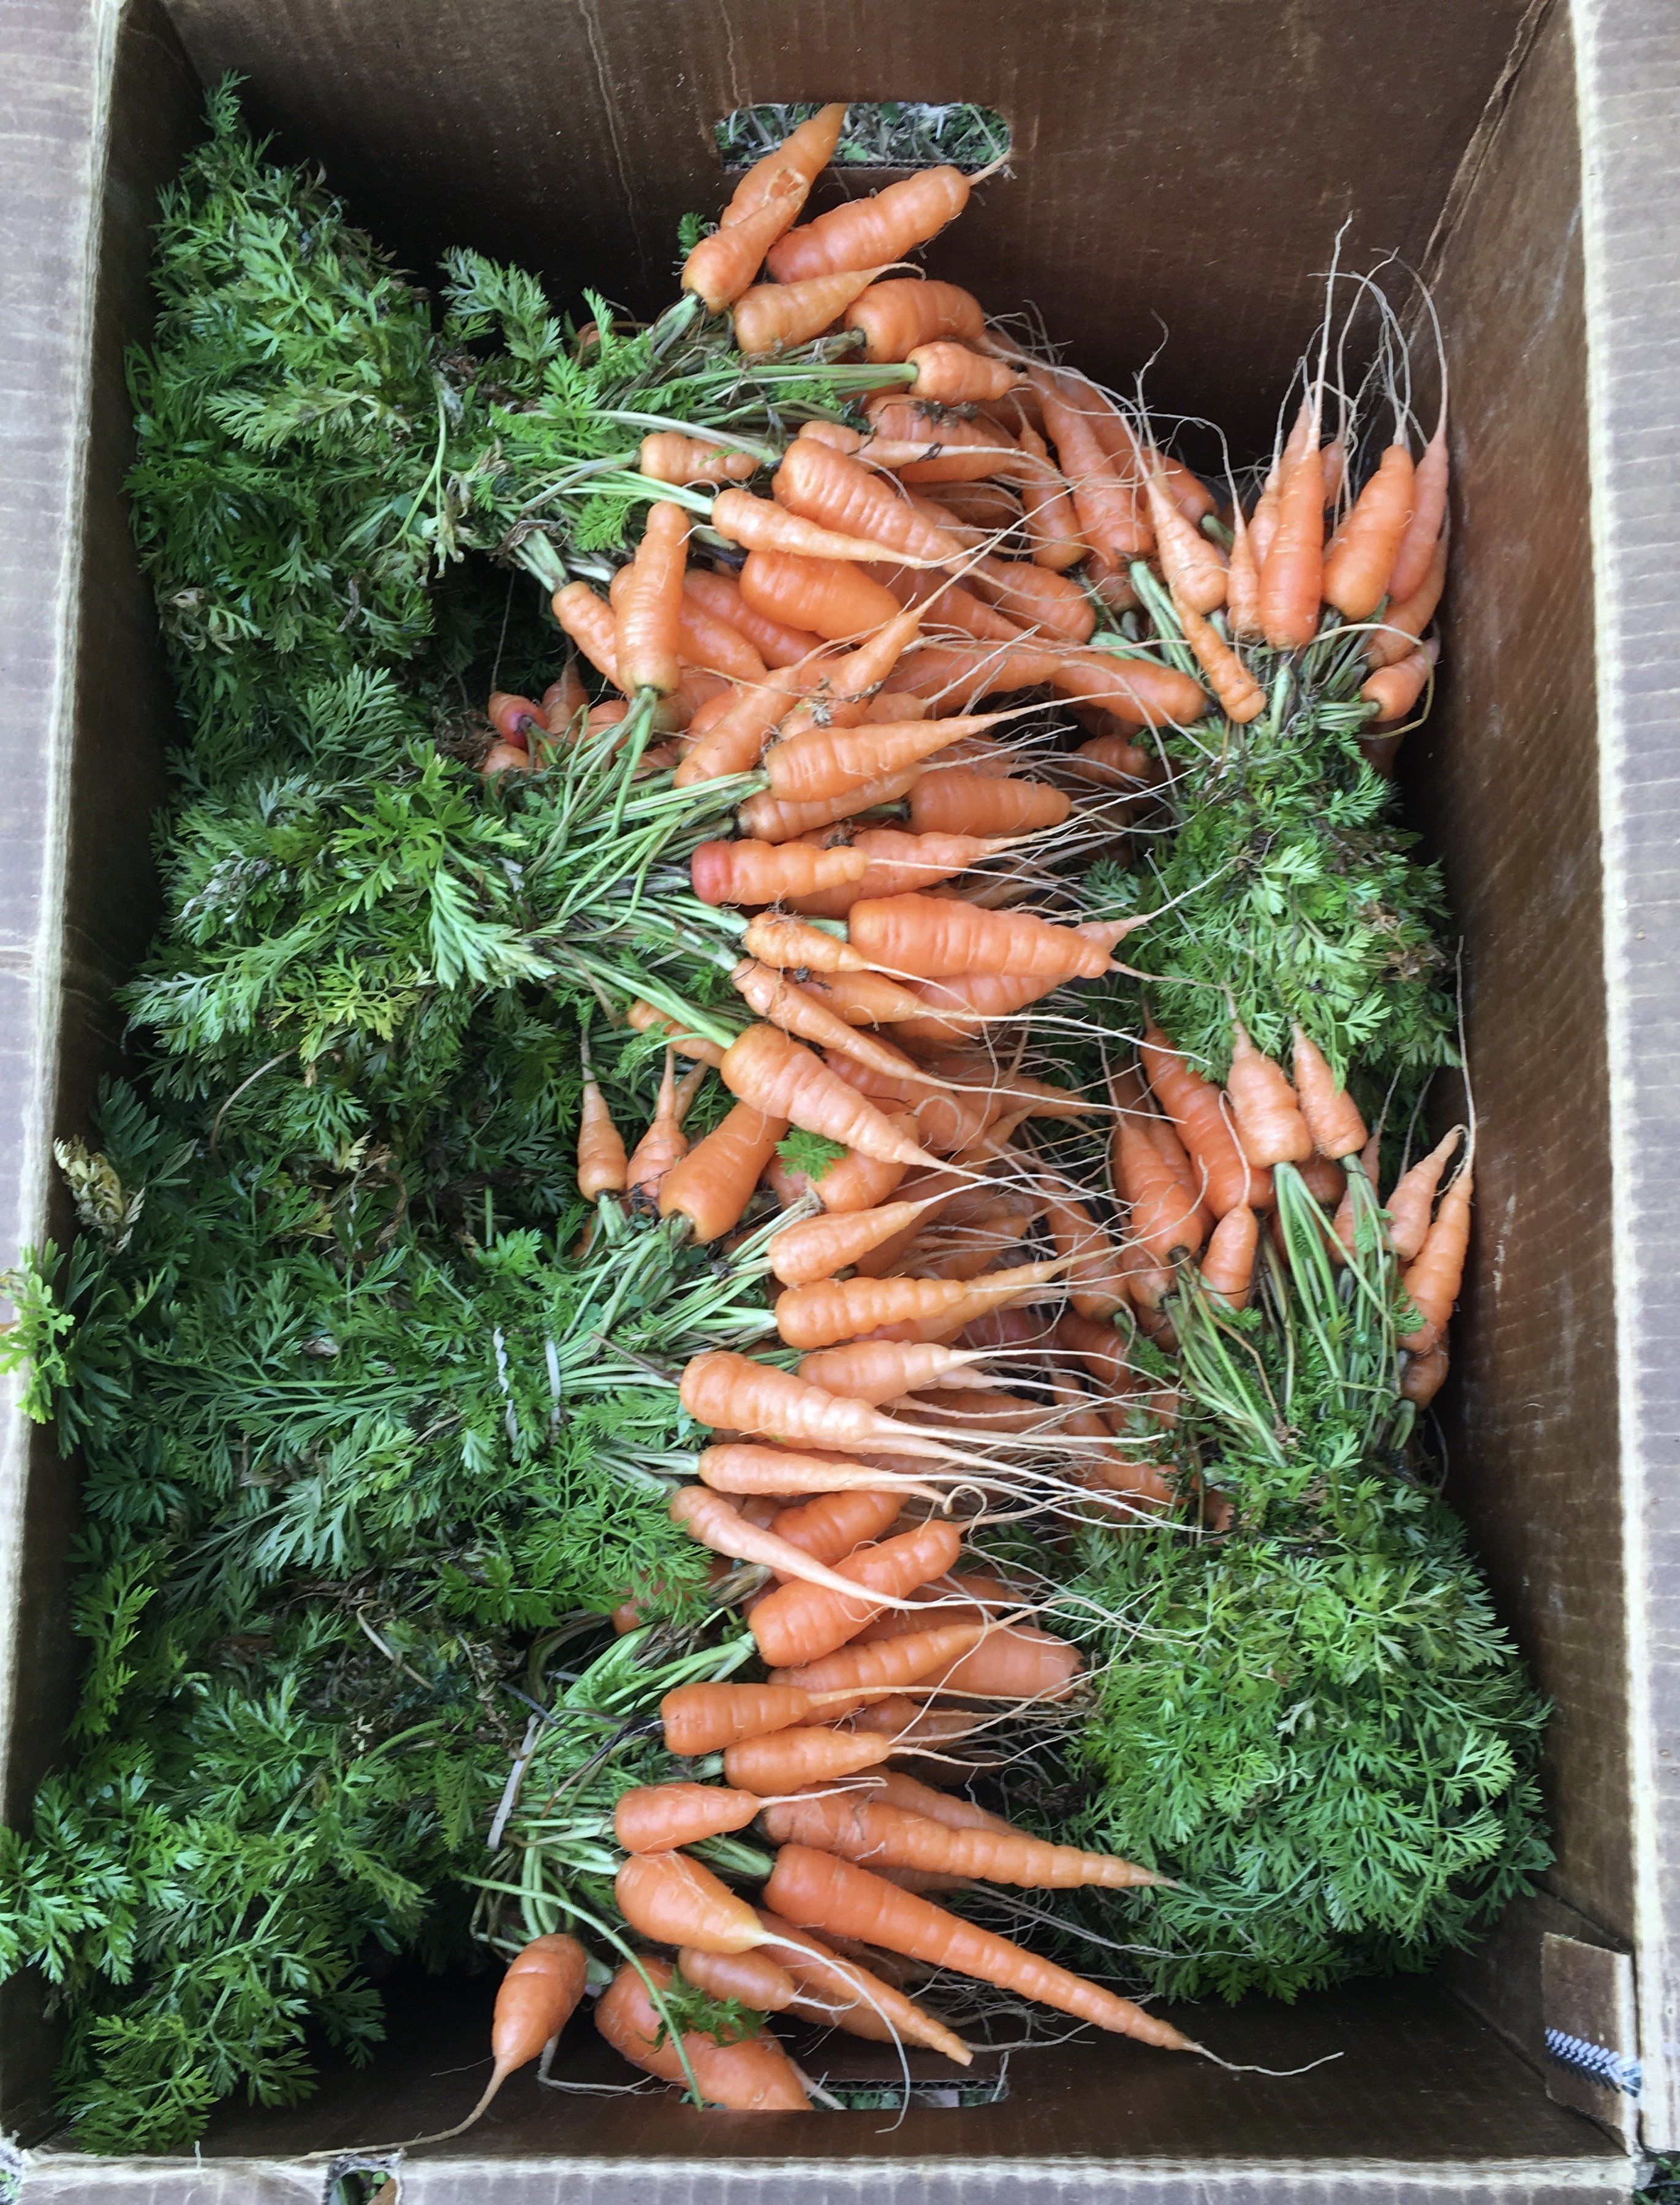 Previous Happening: LAST CSA DELIVERY OF 2020